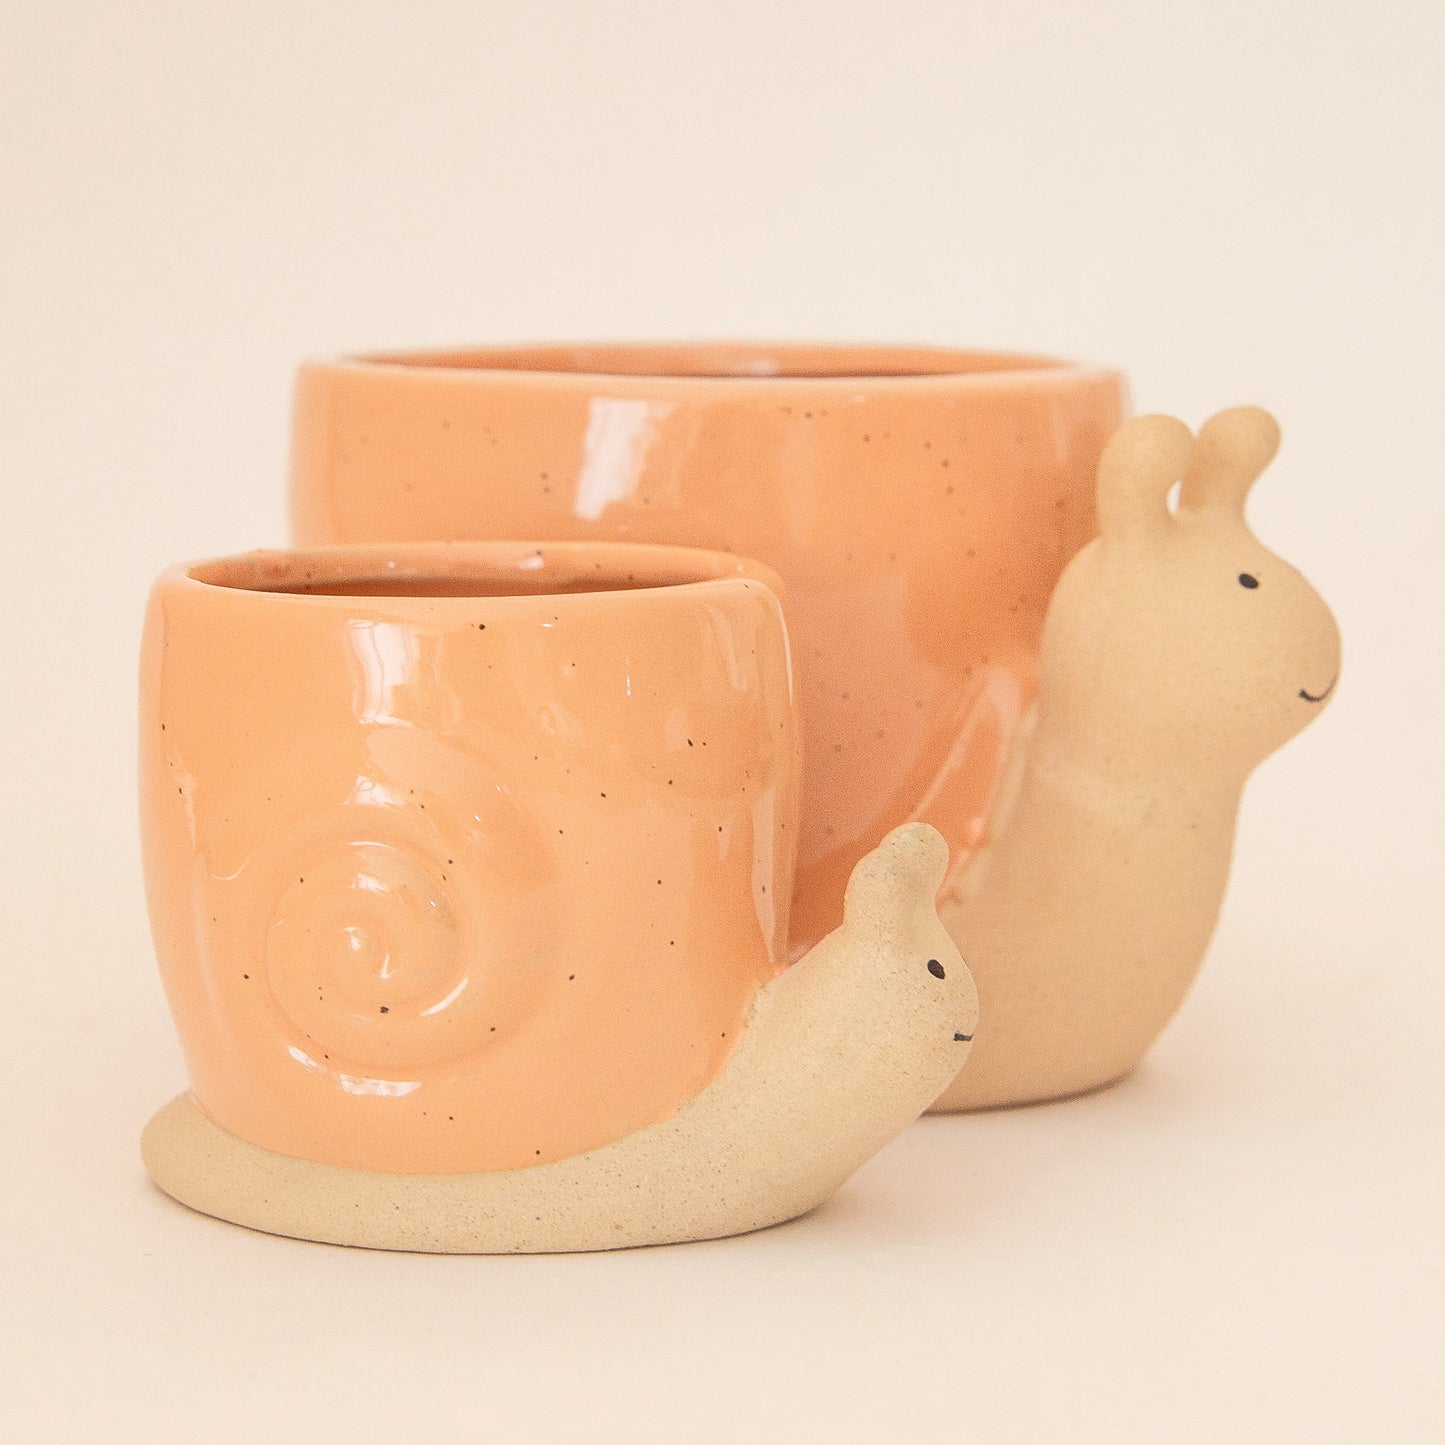 On a light peach background is two ceramic planters in the shape of a snail with a swirly light orange "shell".